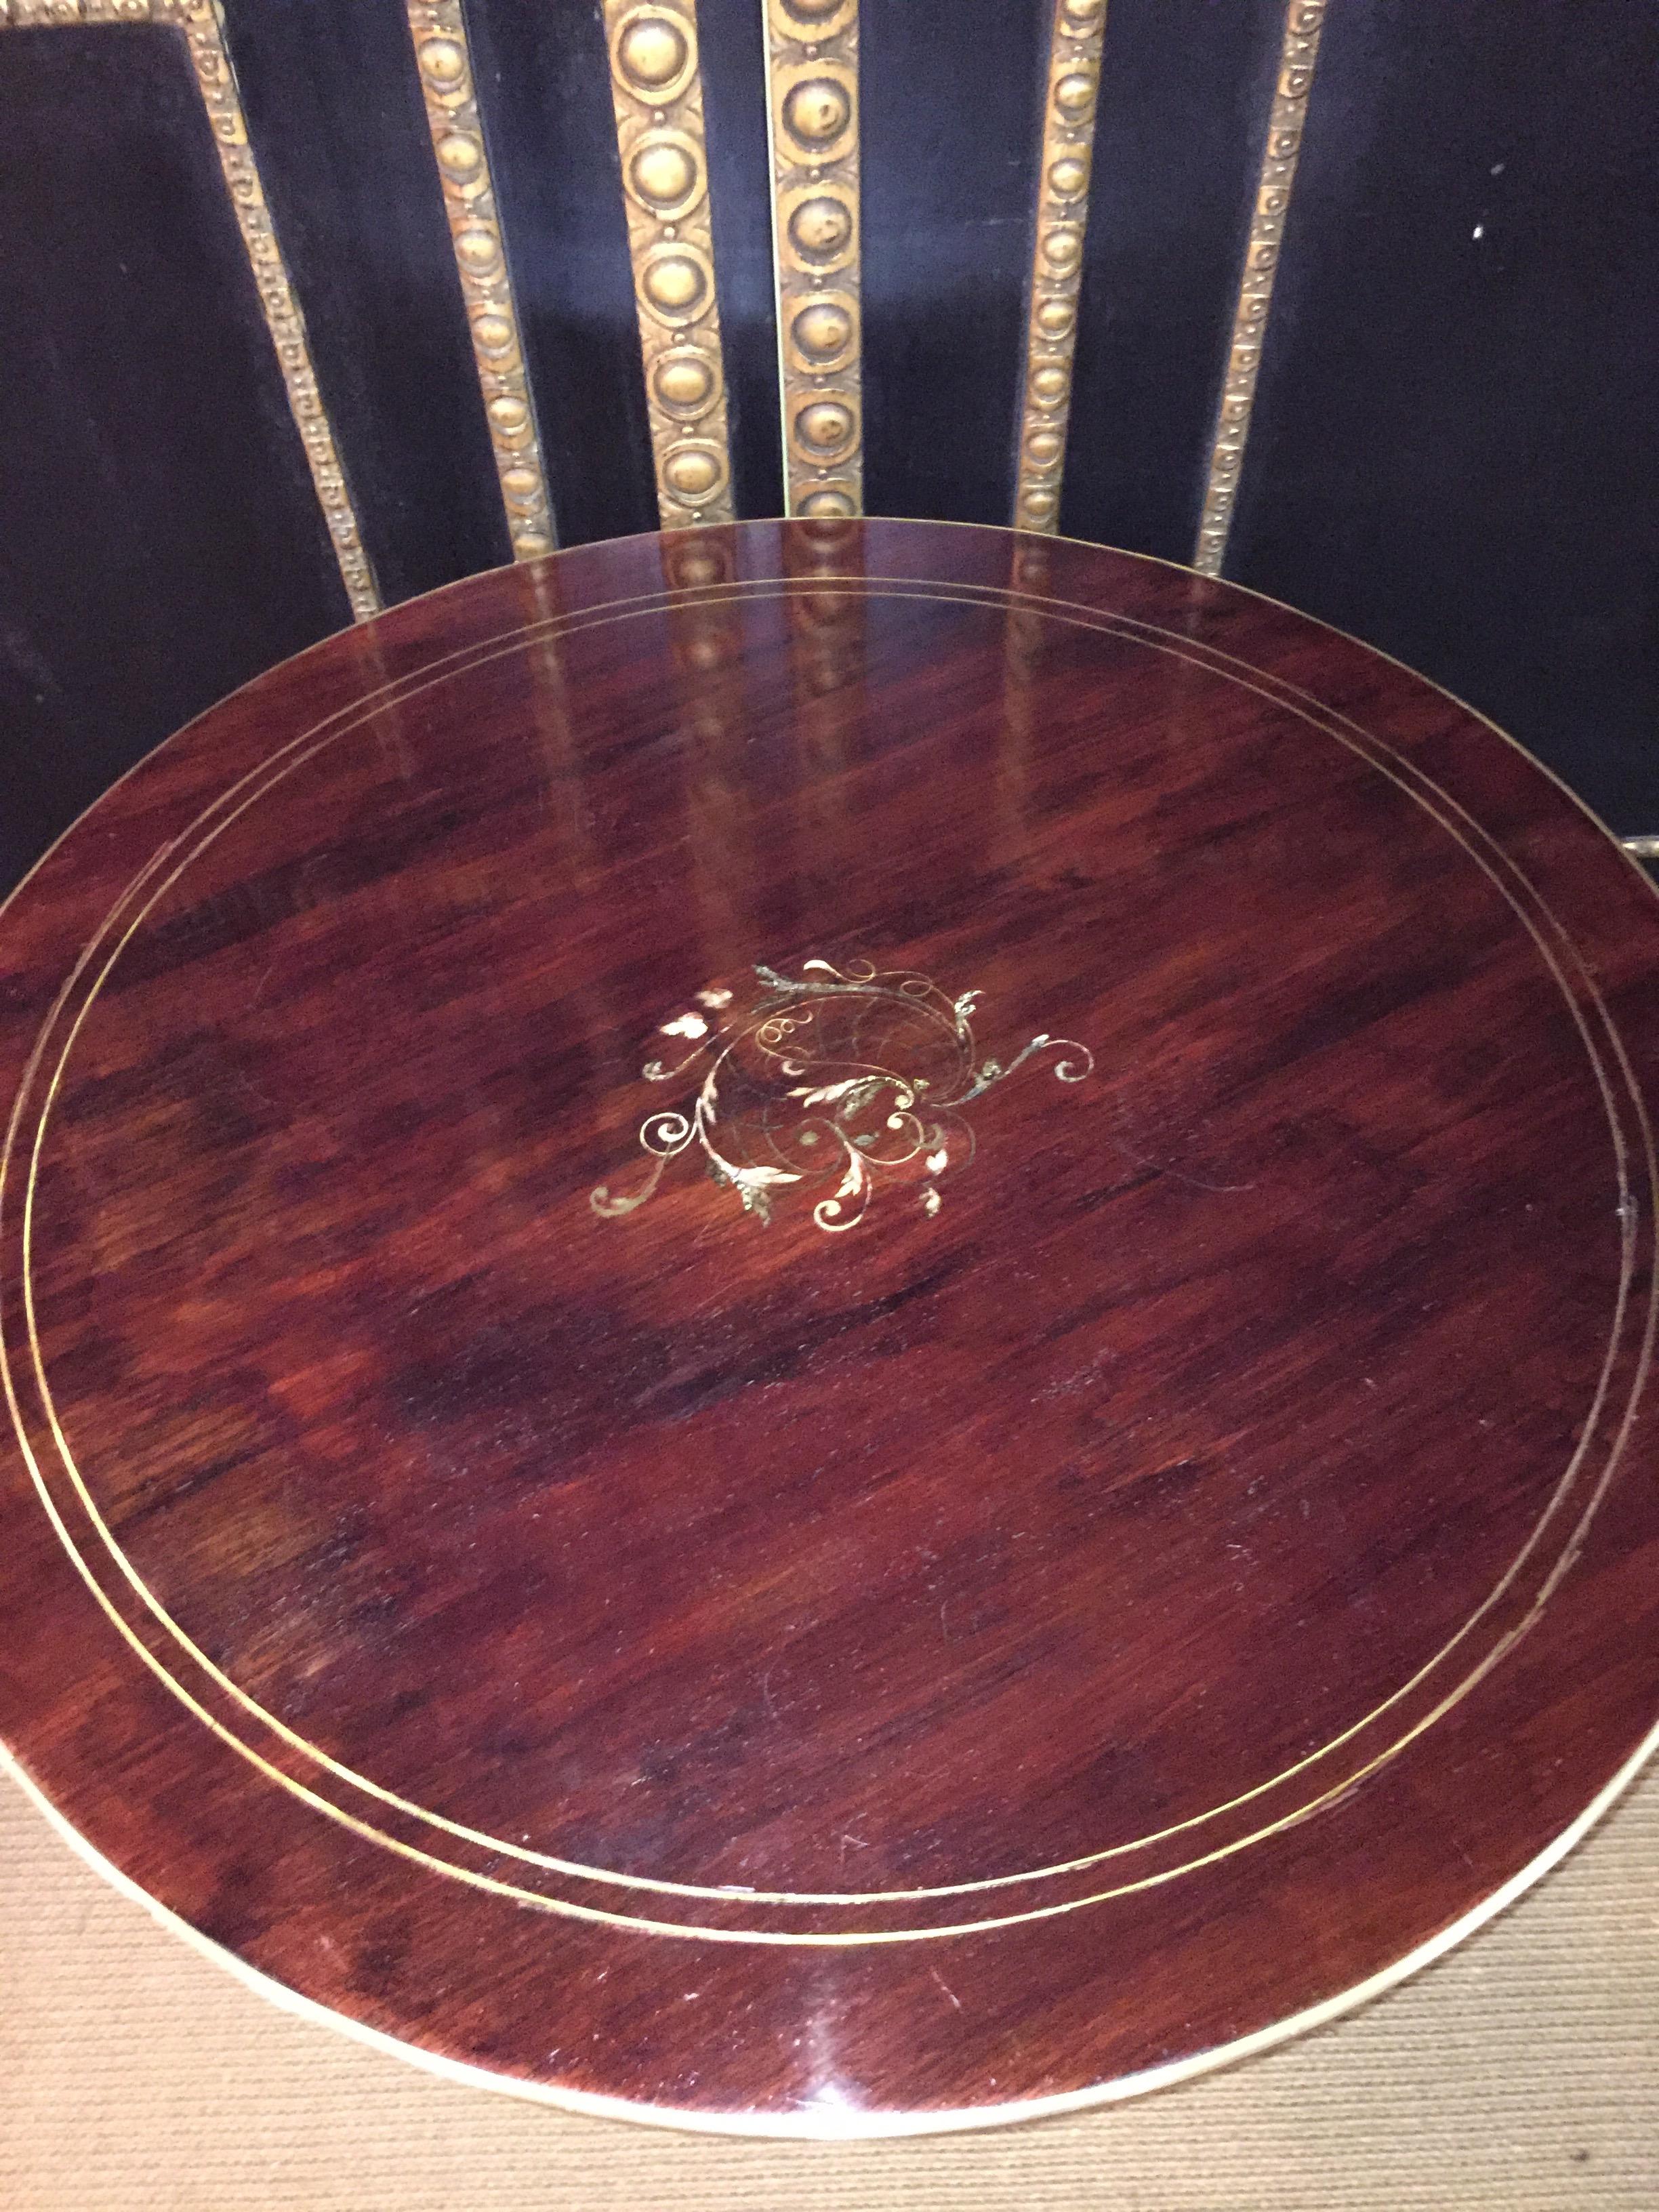 19th Century Antique Biedermeier Table Mahogany Inlaid with Mother of Pearl inlay 1870 For Sale